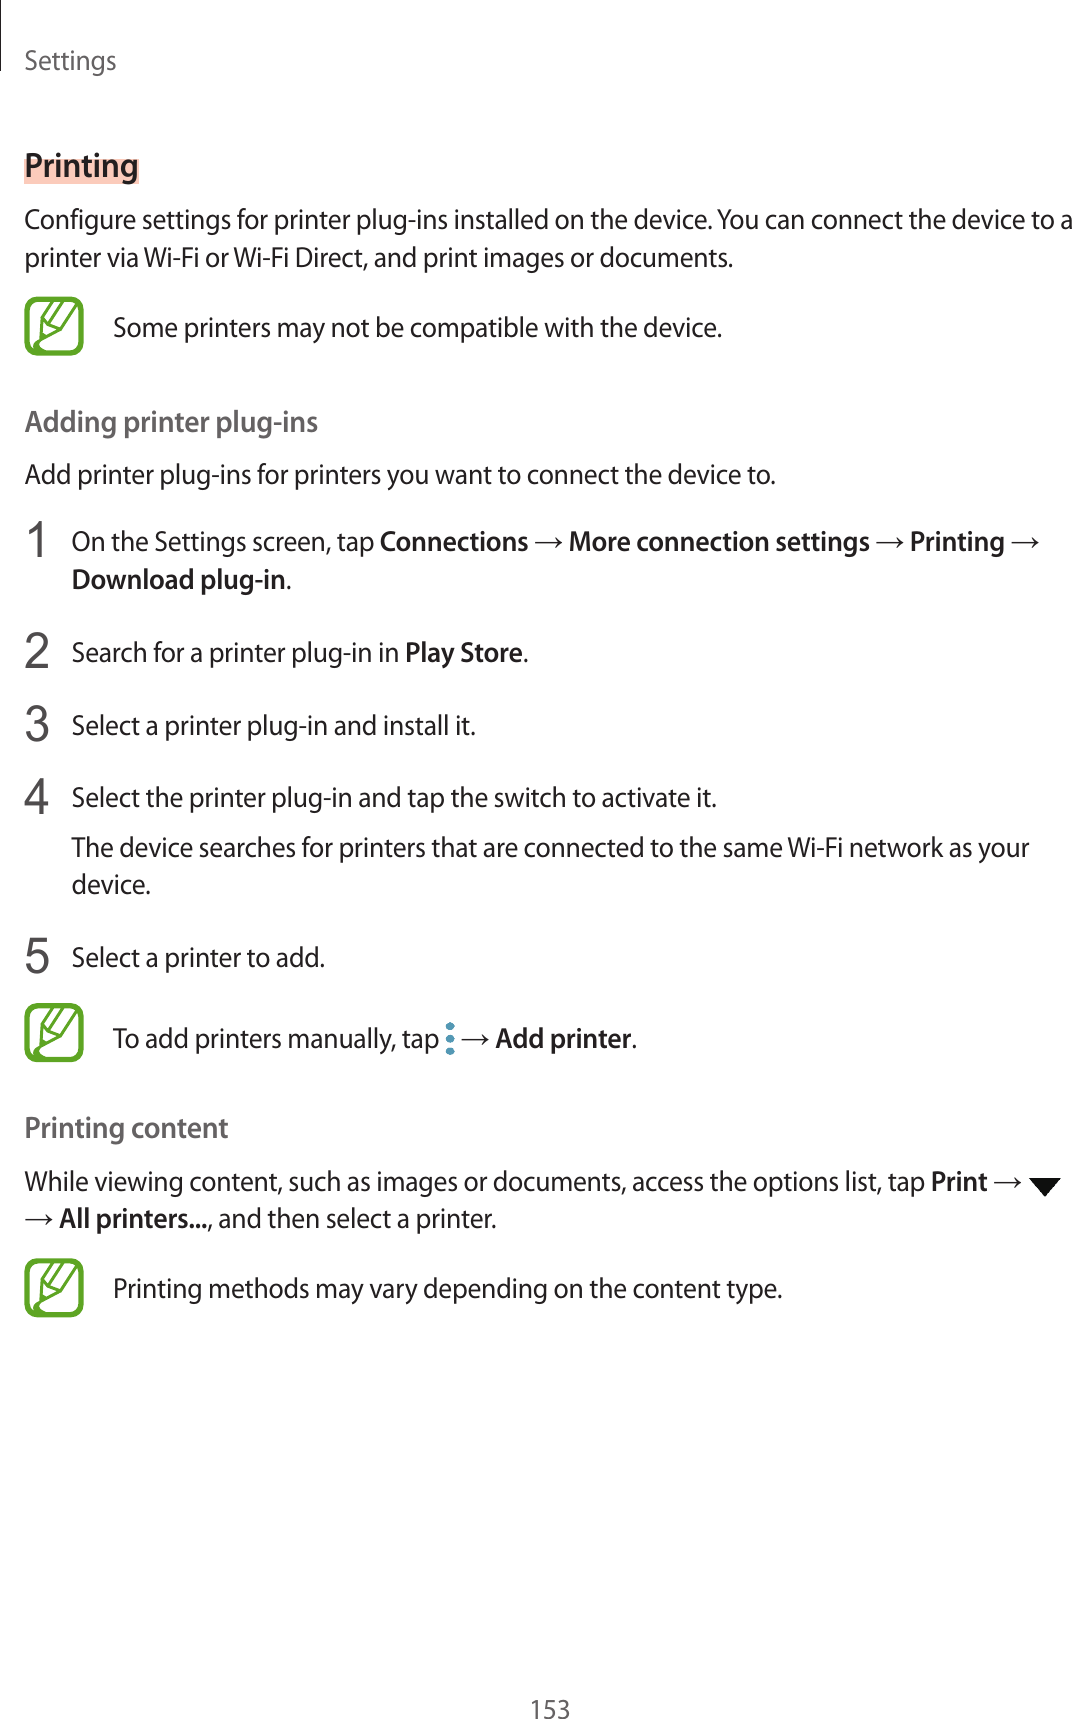 Settings153PrintingConfigure settings for printer plug-ins installed on the device. You can connect the device to a printer via Wi-Fi or Wi-Fi Direct, and print images or documents.Some printers may not be compatible with the device.Adding printer plug-insAdd printer plug-ins for printers you want to connect the device to.1  On the Settings screen, tap Connections → More connection settings → Printing → Download plug-in.2  Search for a printer plug-in in Play Store.3  Select a printer plug-in and install it.4  Select the printer plug-in and tap the switch to activate it.The device searches for printers that are connected to the same Wi-Fi network as your device.5  Select a printer to add.To add printers manually, tap   → Add printer.Printing contentWhile viewing content, such as images or documents, access the options list, tap Print →   → All printers..., and then select a printer.Printing methods may vary depending on the content type.